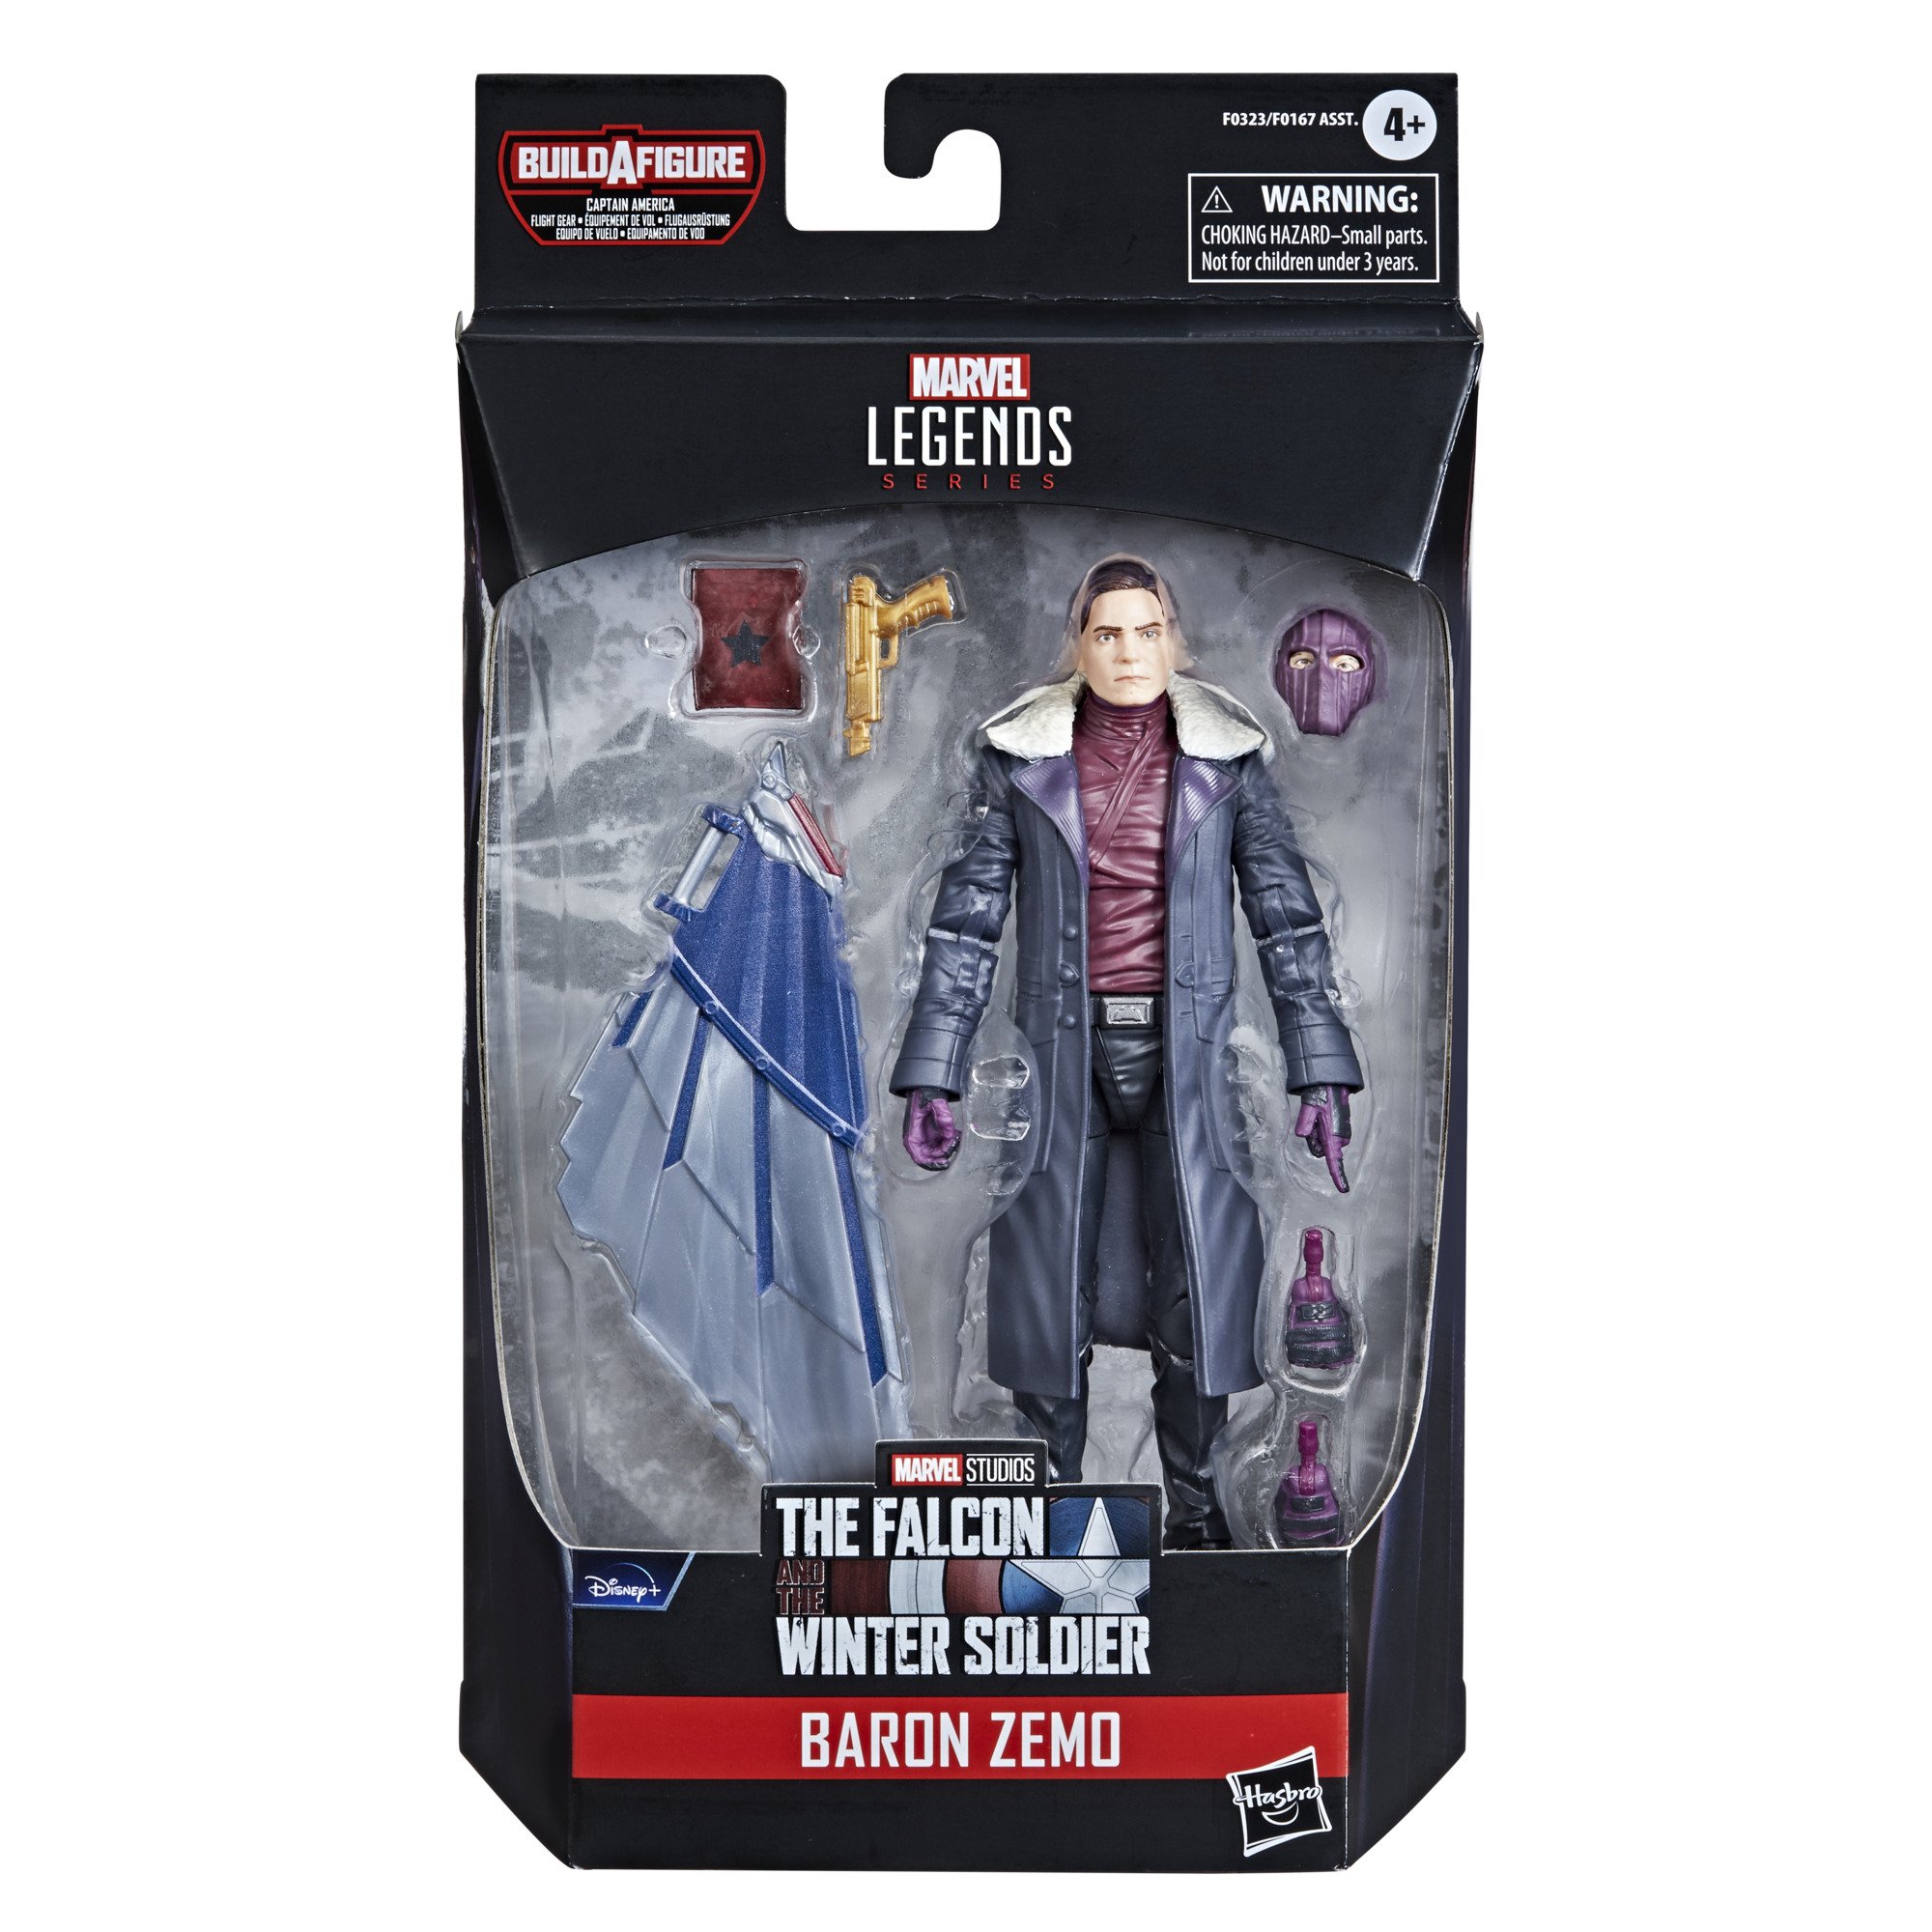 Baron Zemo packaged